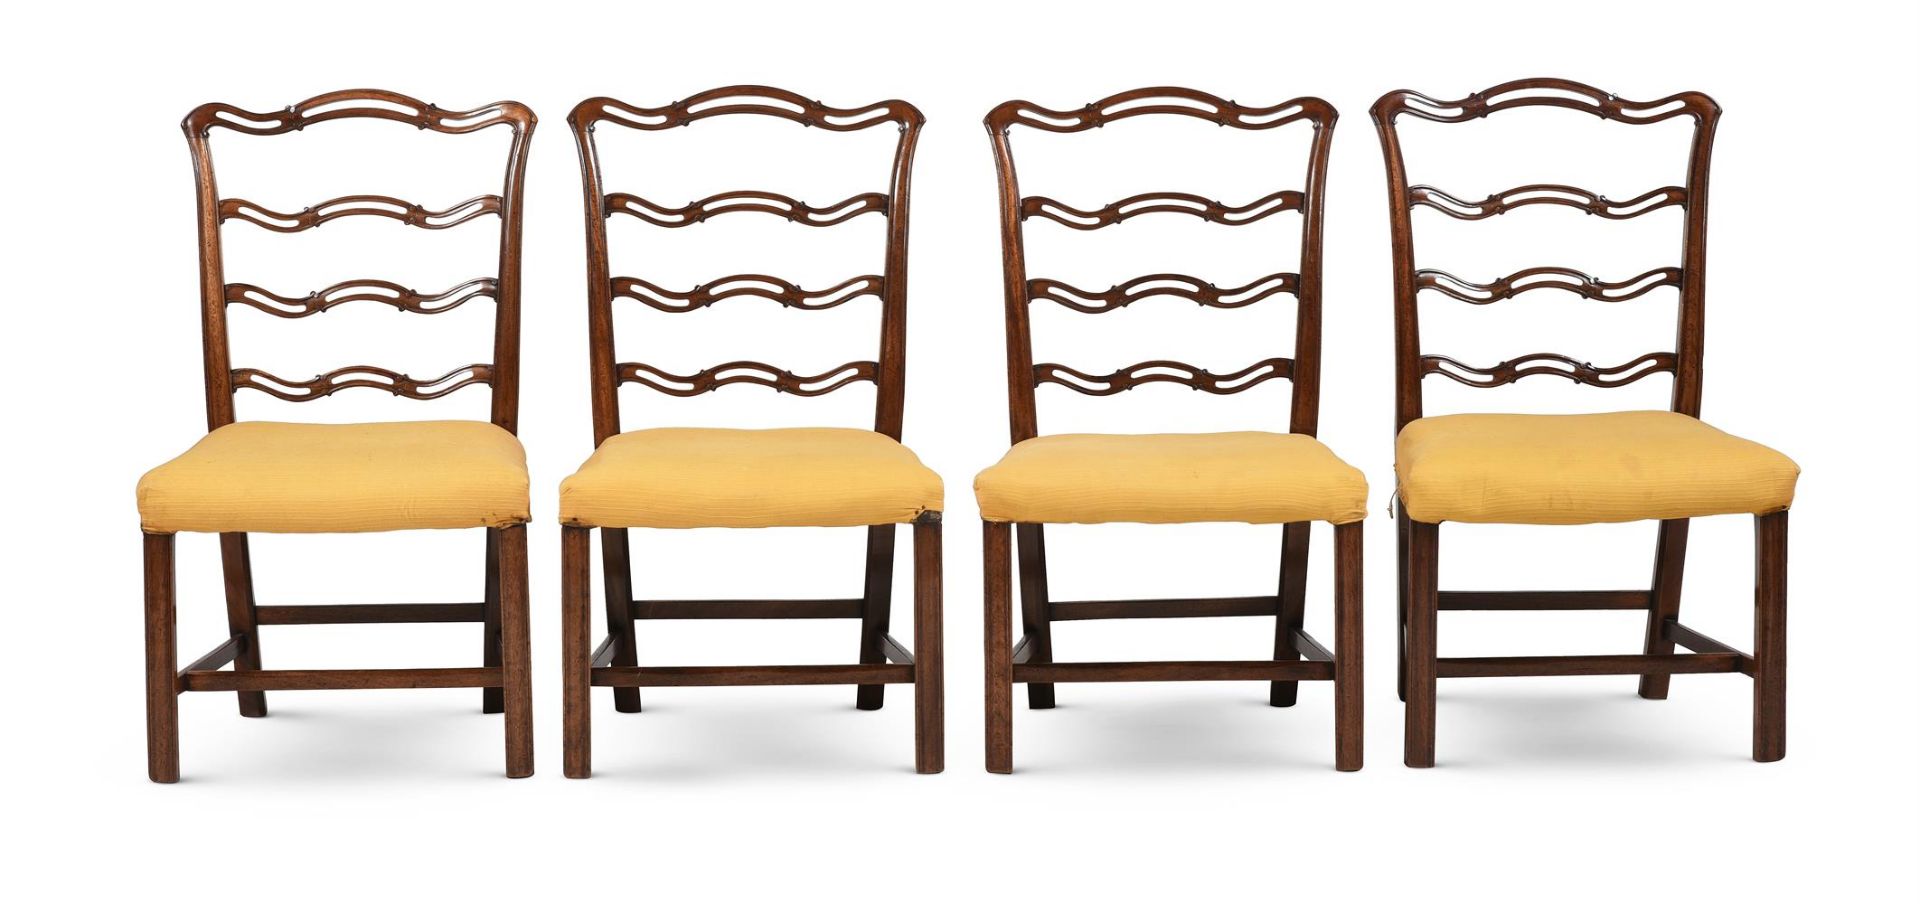 A HARLEQUIN SET OF FOURTEEN MAHOGANY AND UPHOLSTERED LADDERBACK DINING CHAIRS, LATE 19TH CENTURY - Image 3 of 6